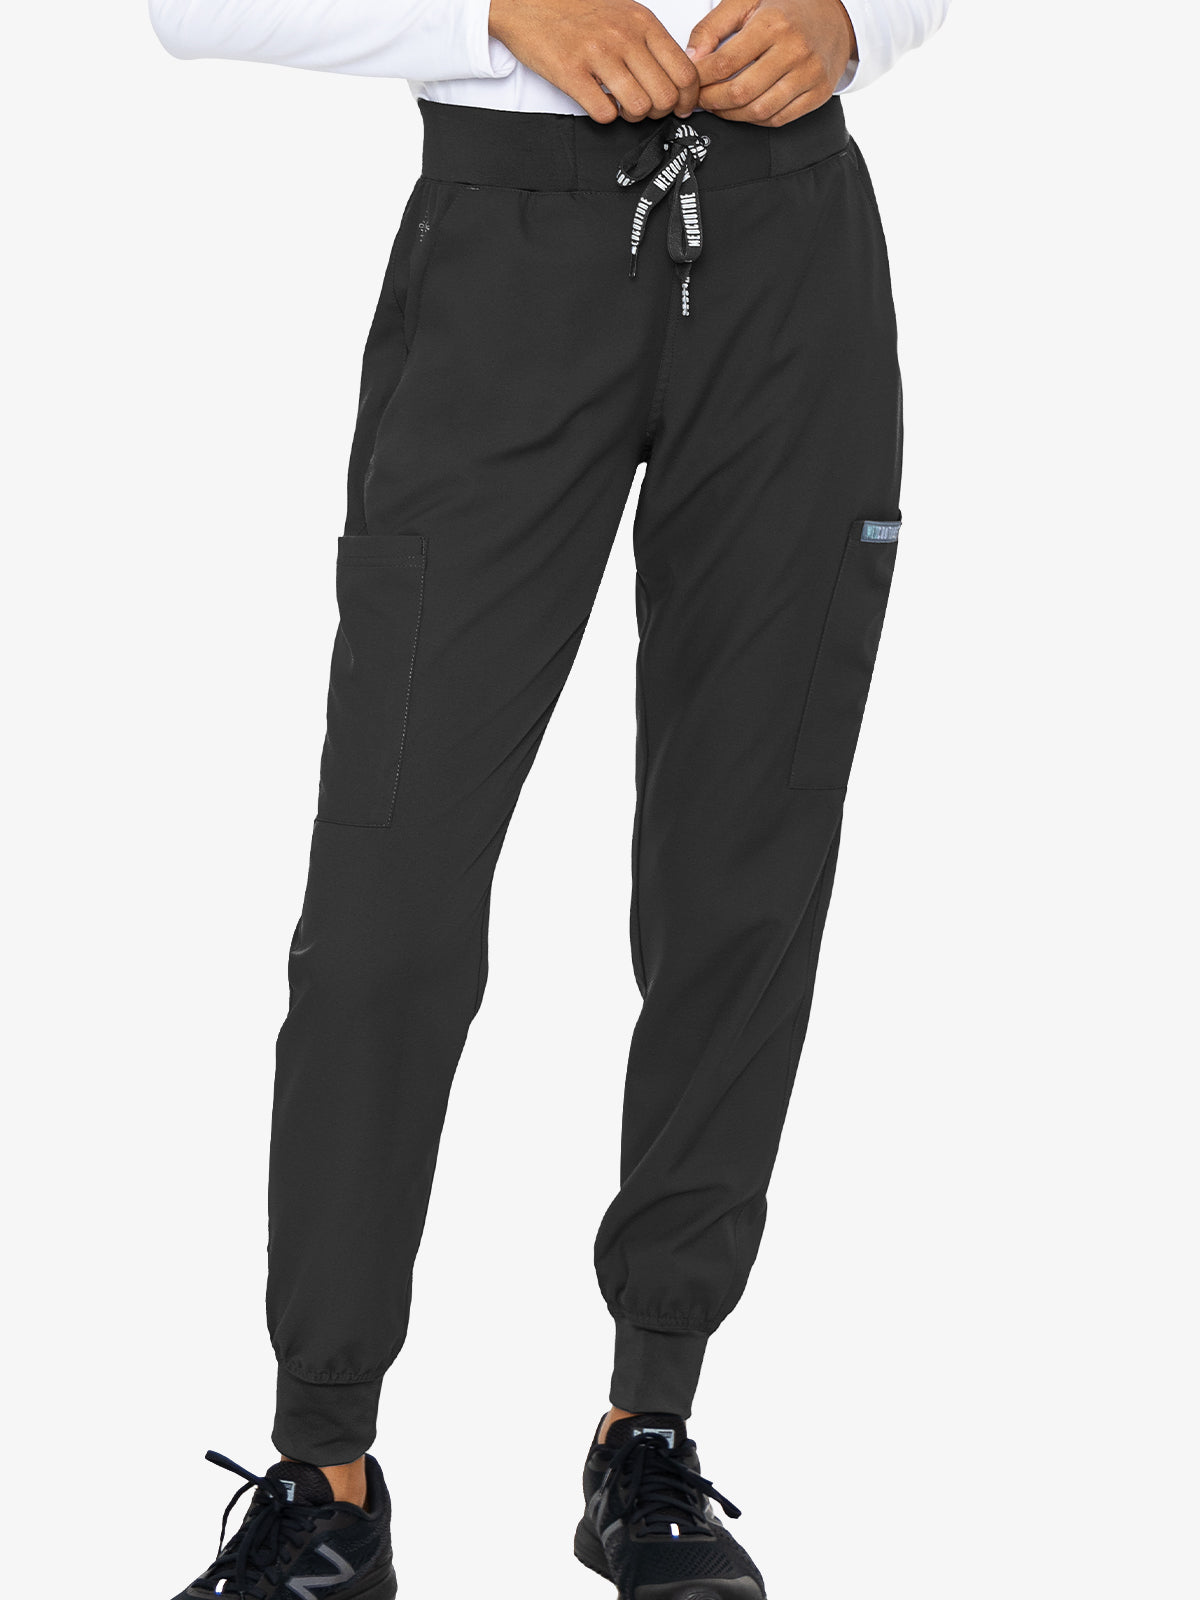 Med Couture 2711 Insight Jogger Pant Black